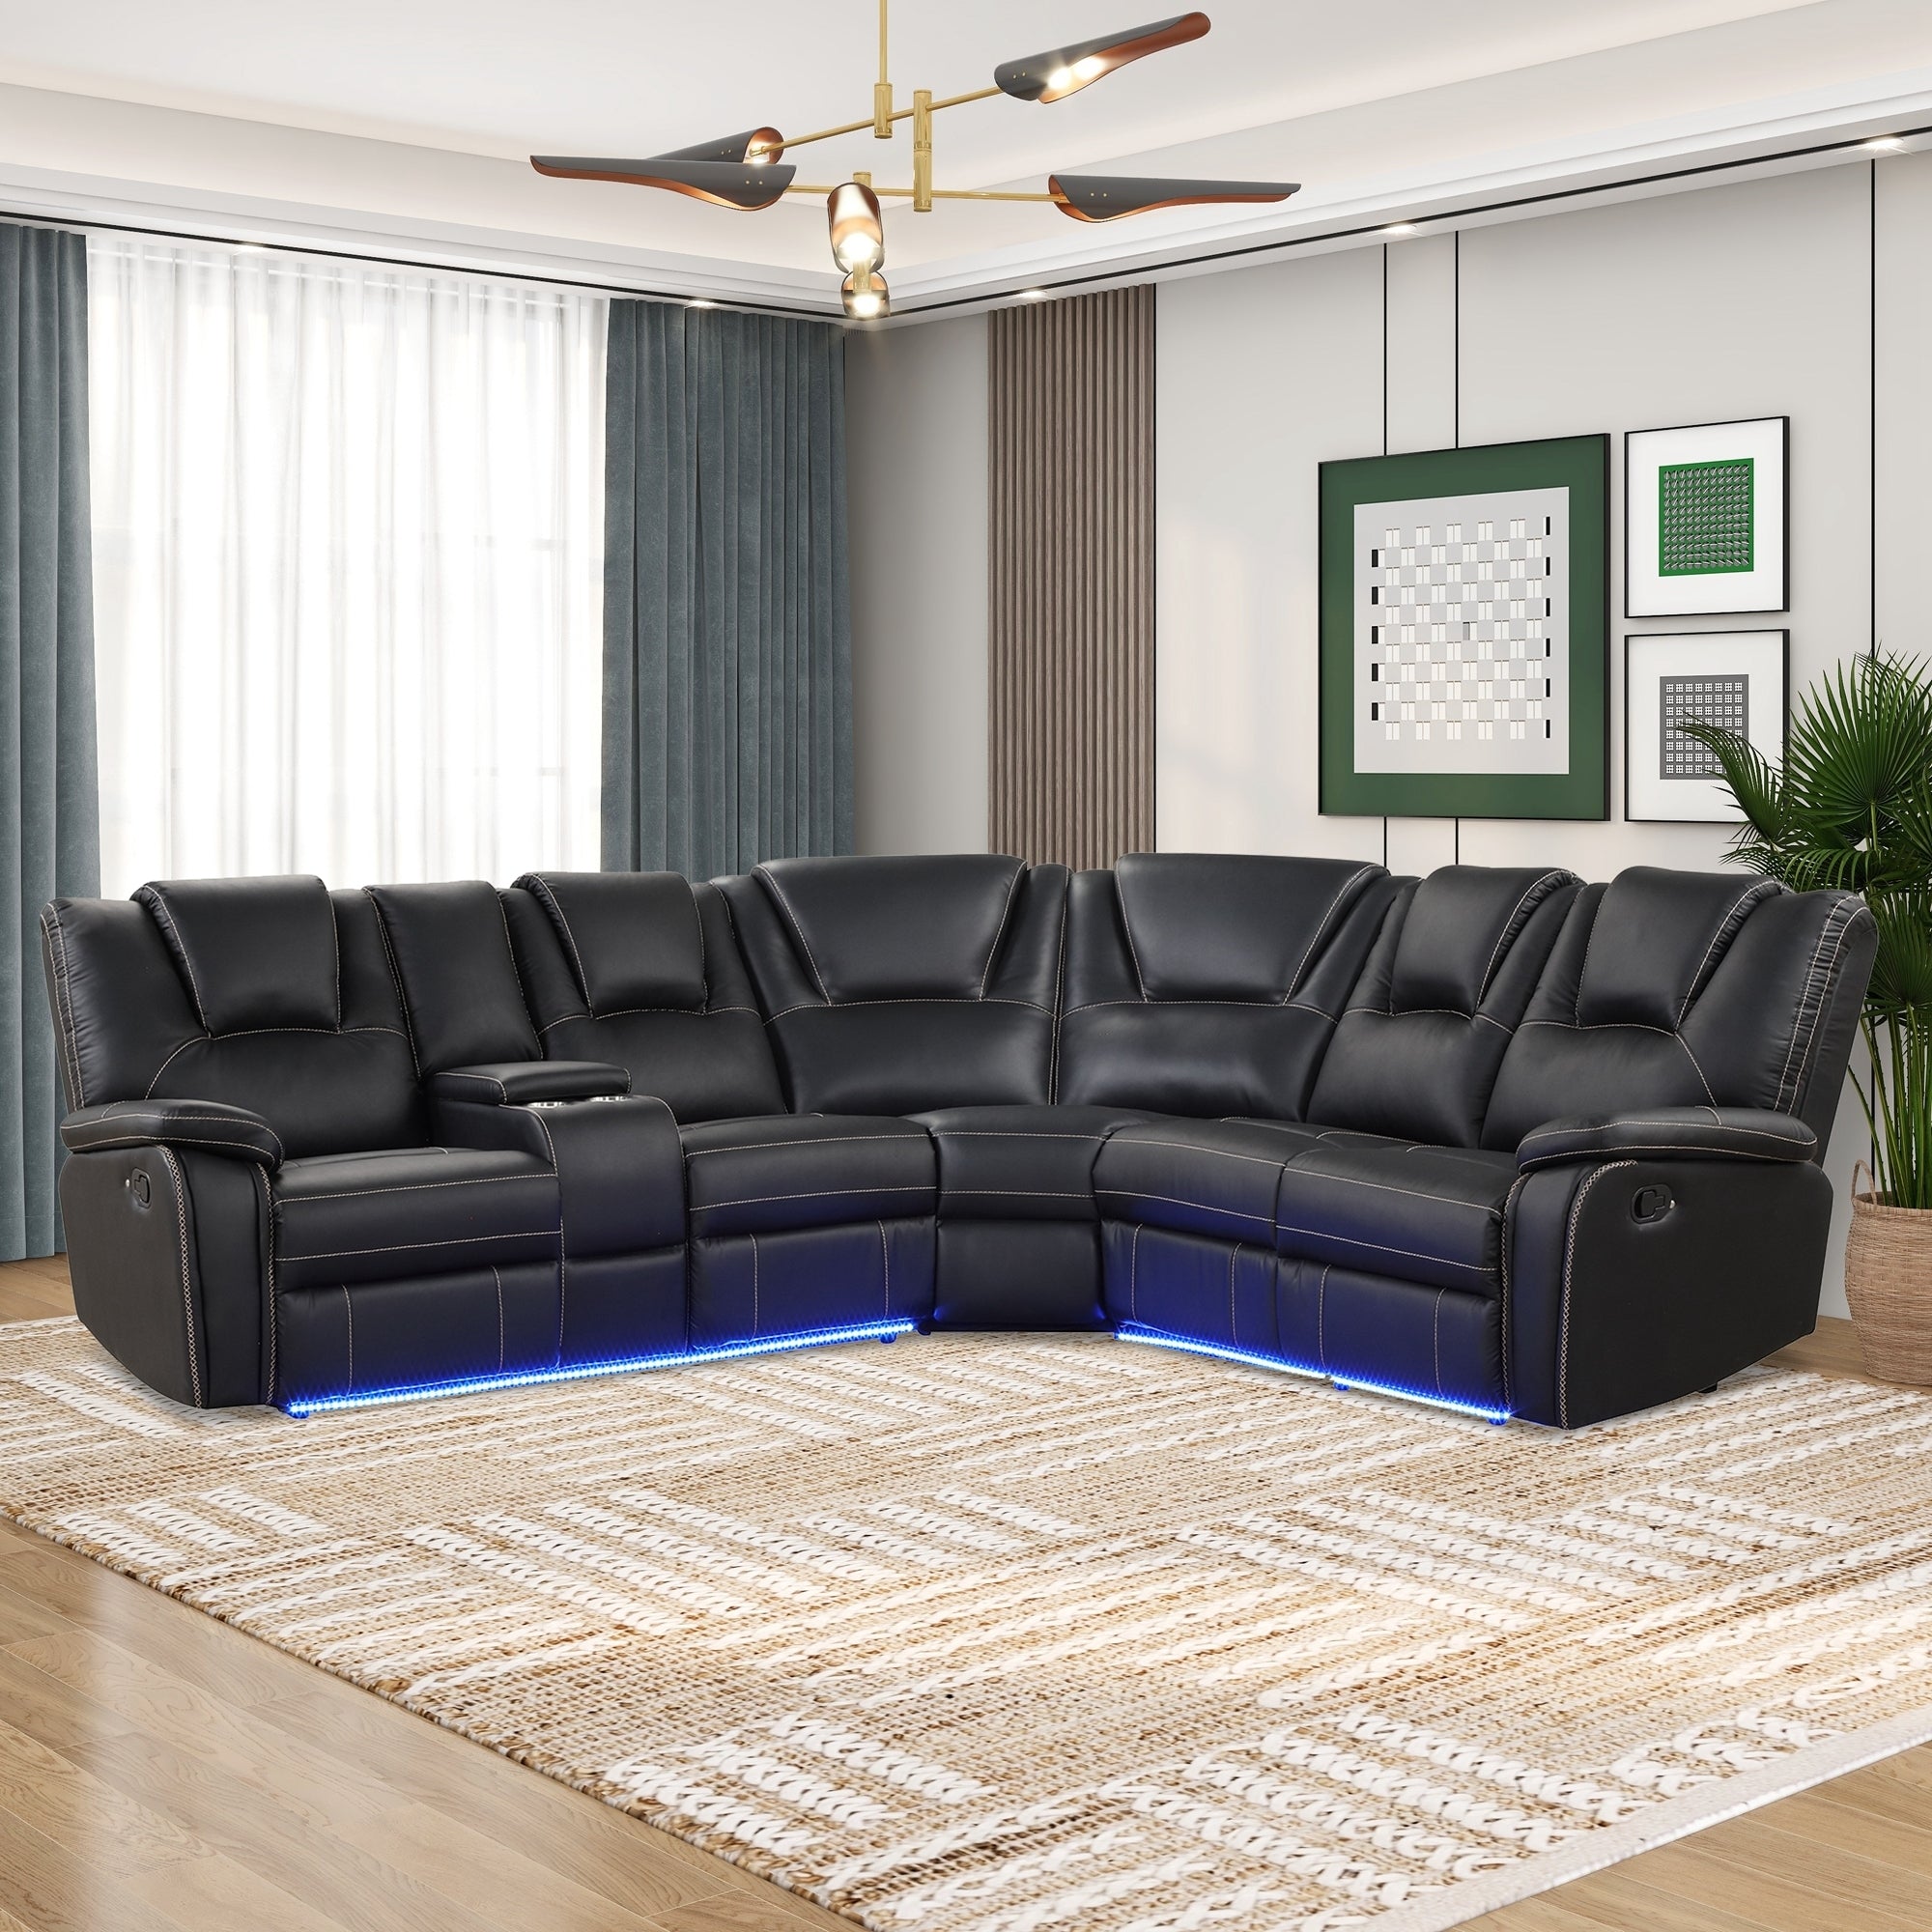 Modern Faux Leather Reclining Sofa with LED Console - Symmetrical Design, 2 Cup Holders, Storage - Black | Living Room Furniture Set